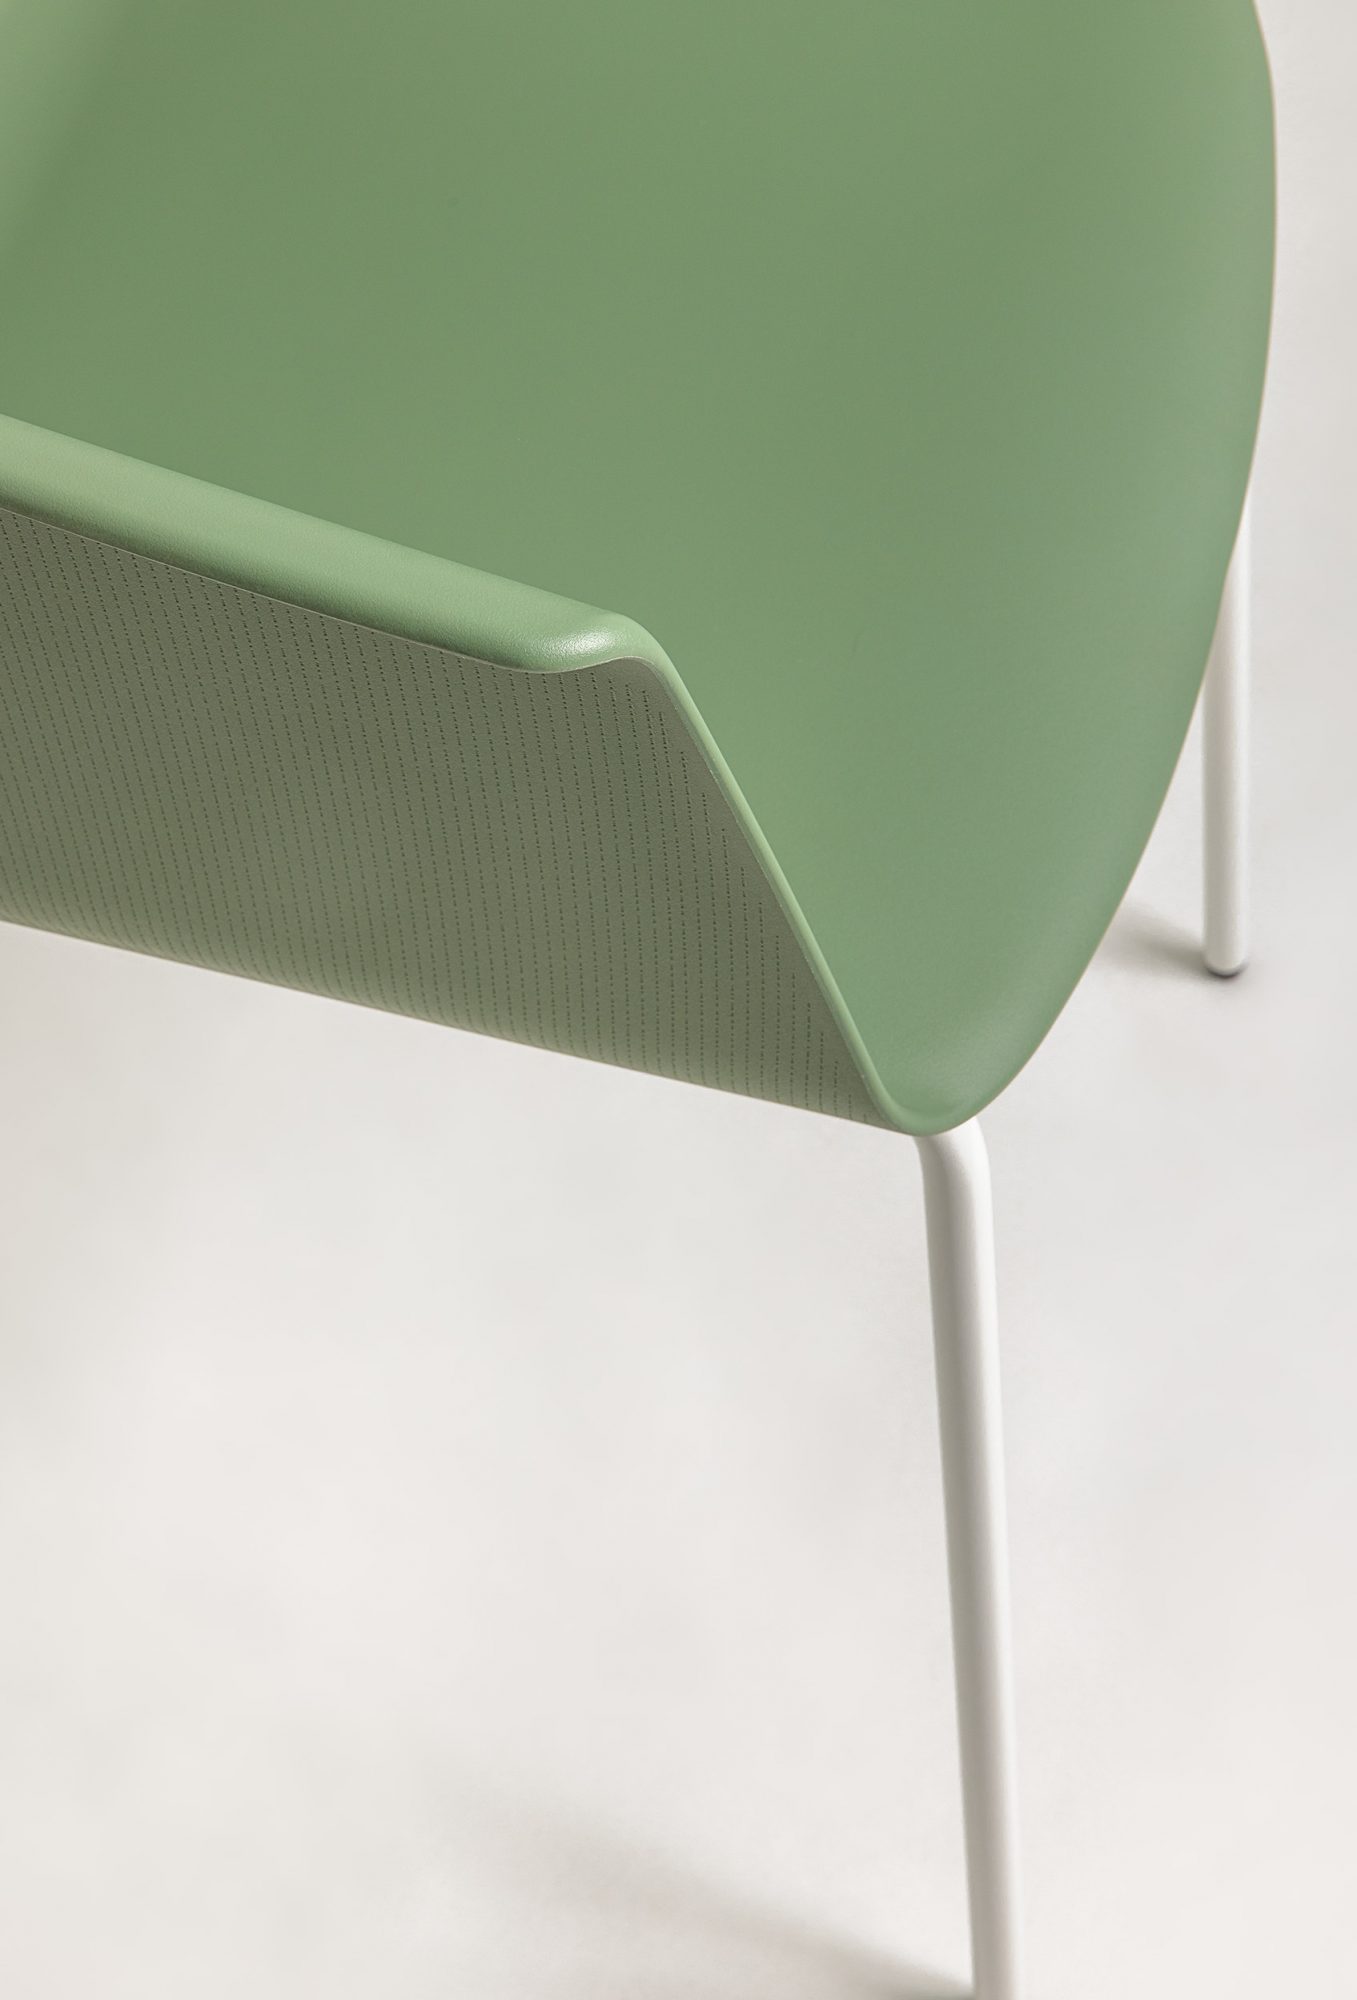 Detailed close-up of the armrest of the Noom 60 chair designed by Alegre Design for Actiu. The chair features a smooth, olive green surface with a subtle, fine-textured pattern. The white metal legs are partially visible, emphasizing the chair's minimalist and modern design.